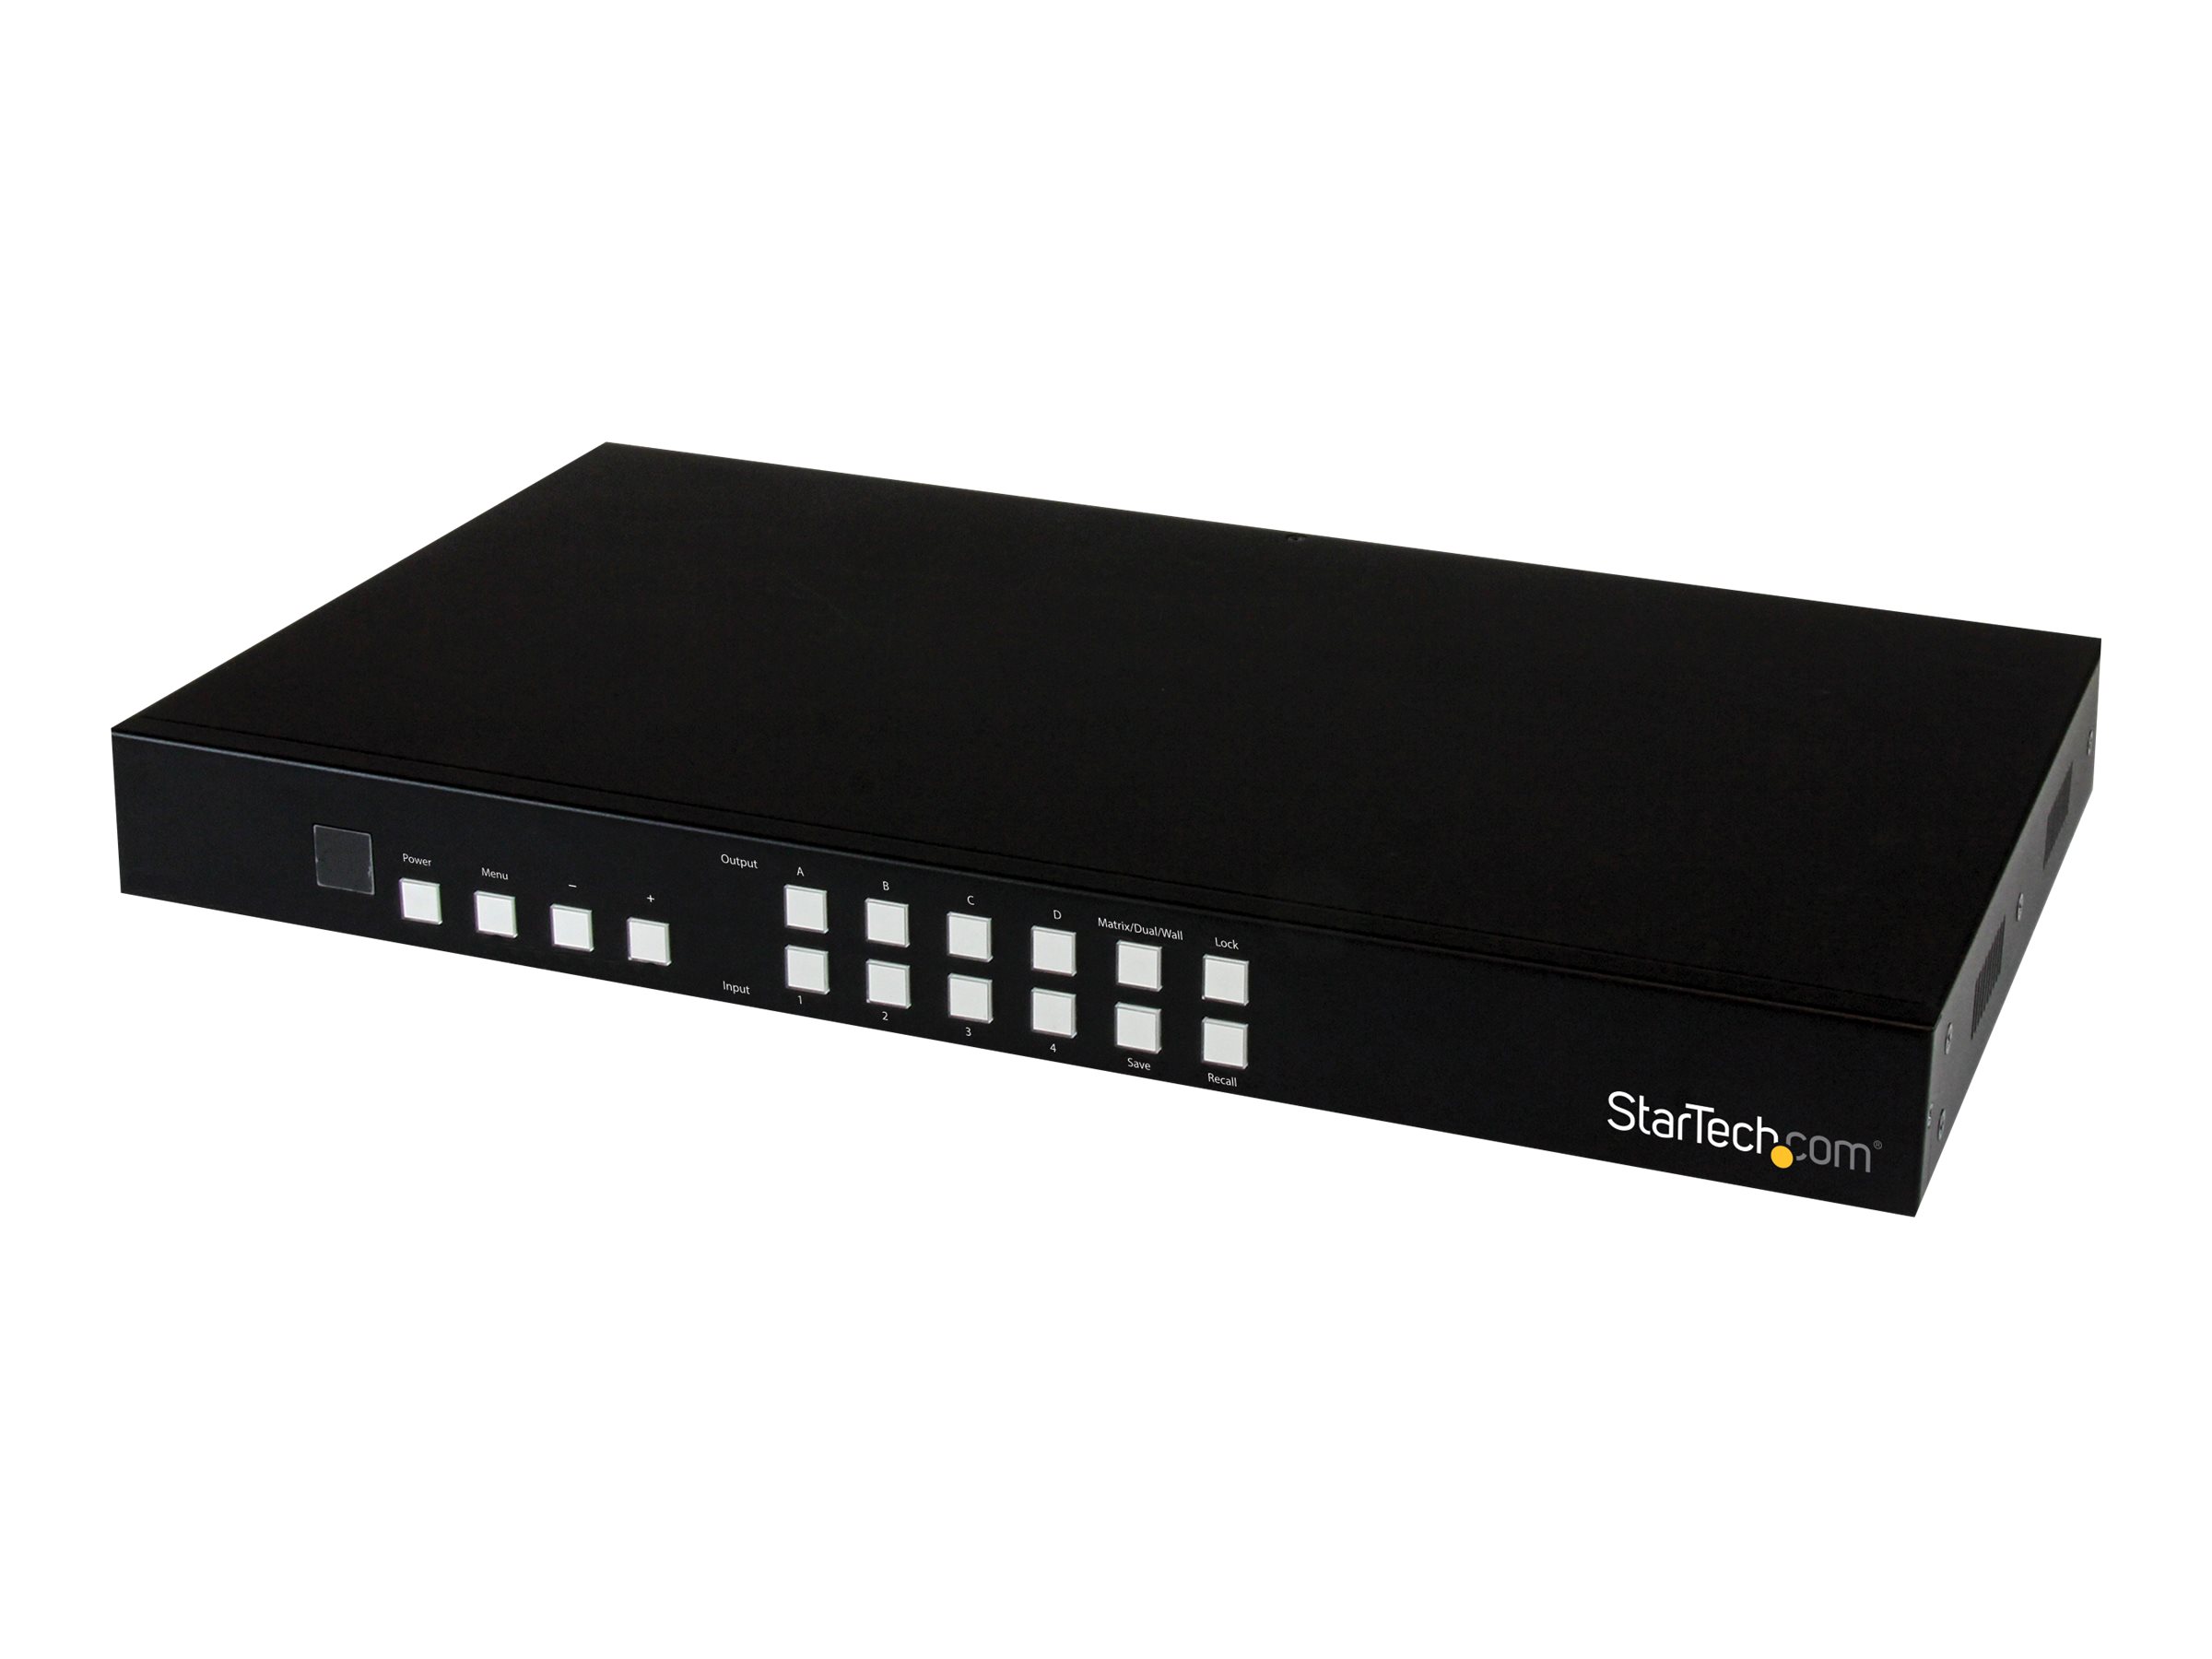 StarTech.com 4x4 HDMI Matrix Switch with Audio and Ethernet Control - 4K  60Hz Video - Rack Mount HDMI 2.0 Splitter with Remote (VS424HD4K60)